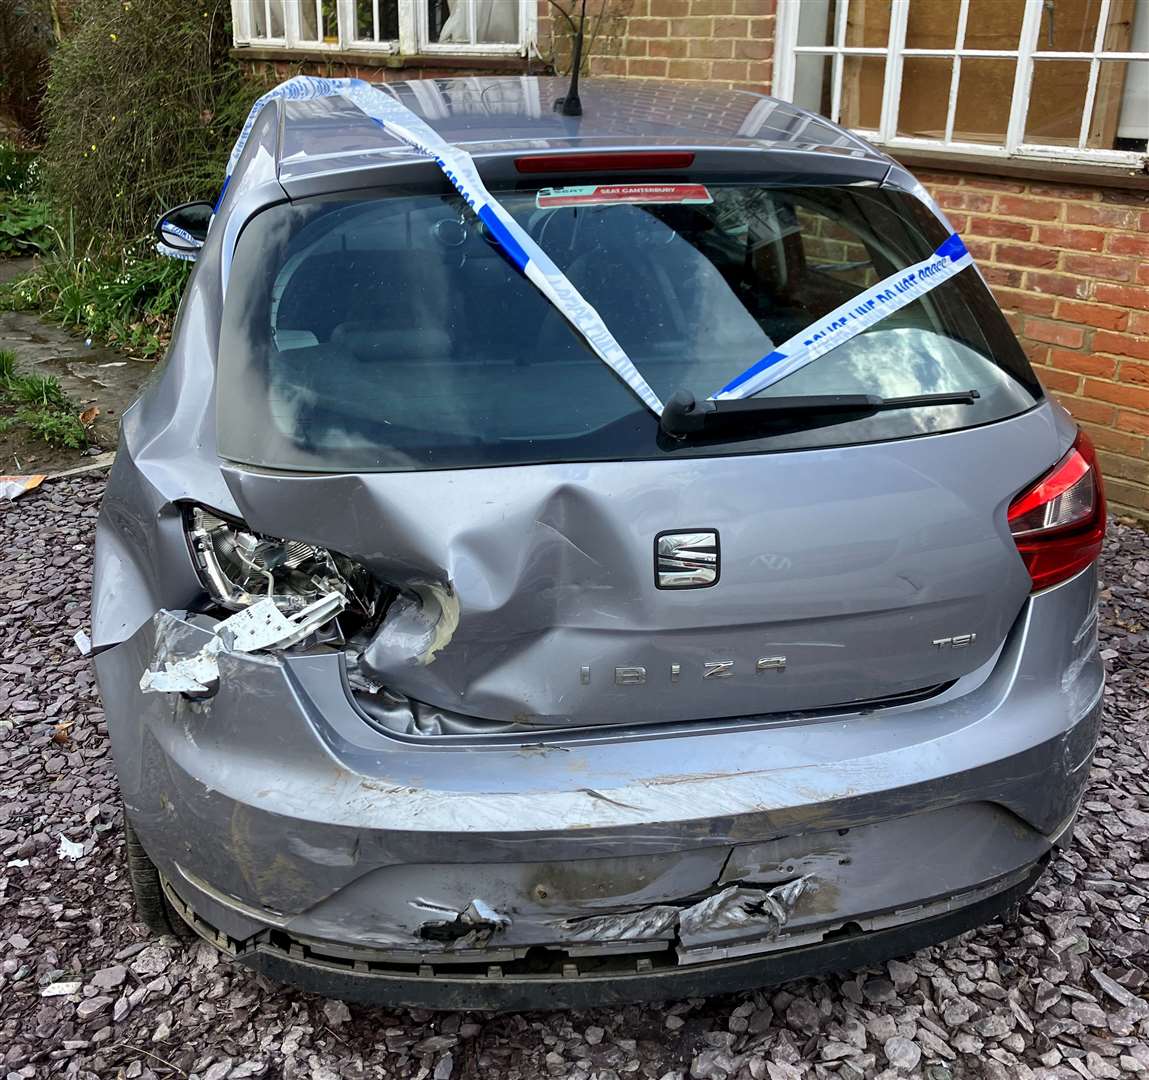 Sarah's Seat Ibiza was badly damaged following the pursuit